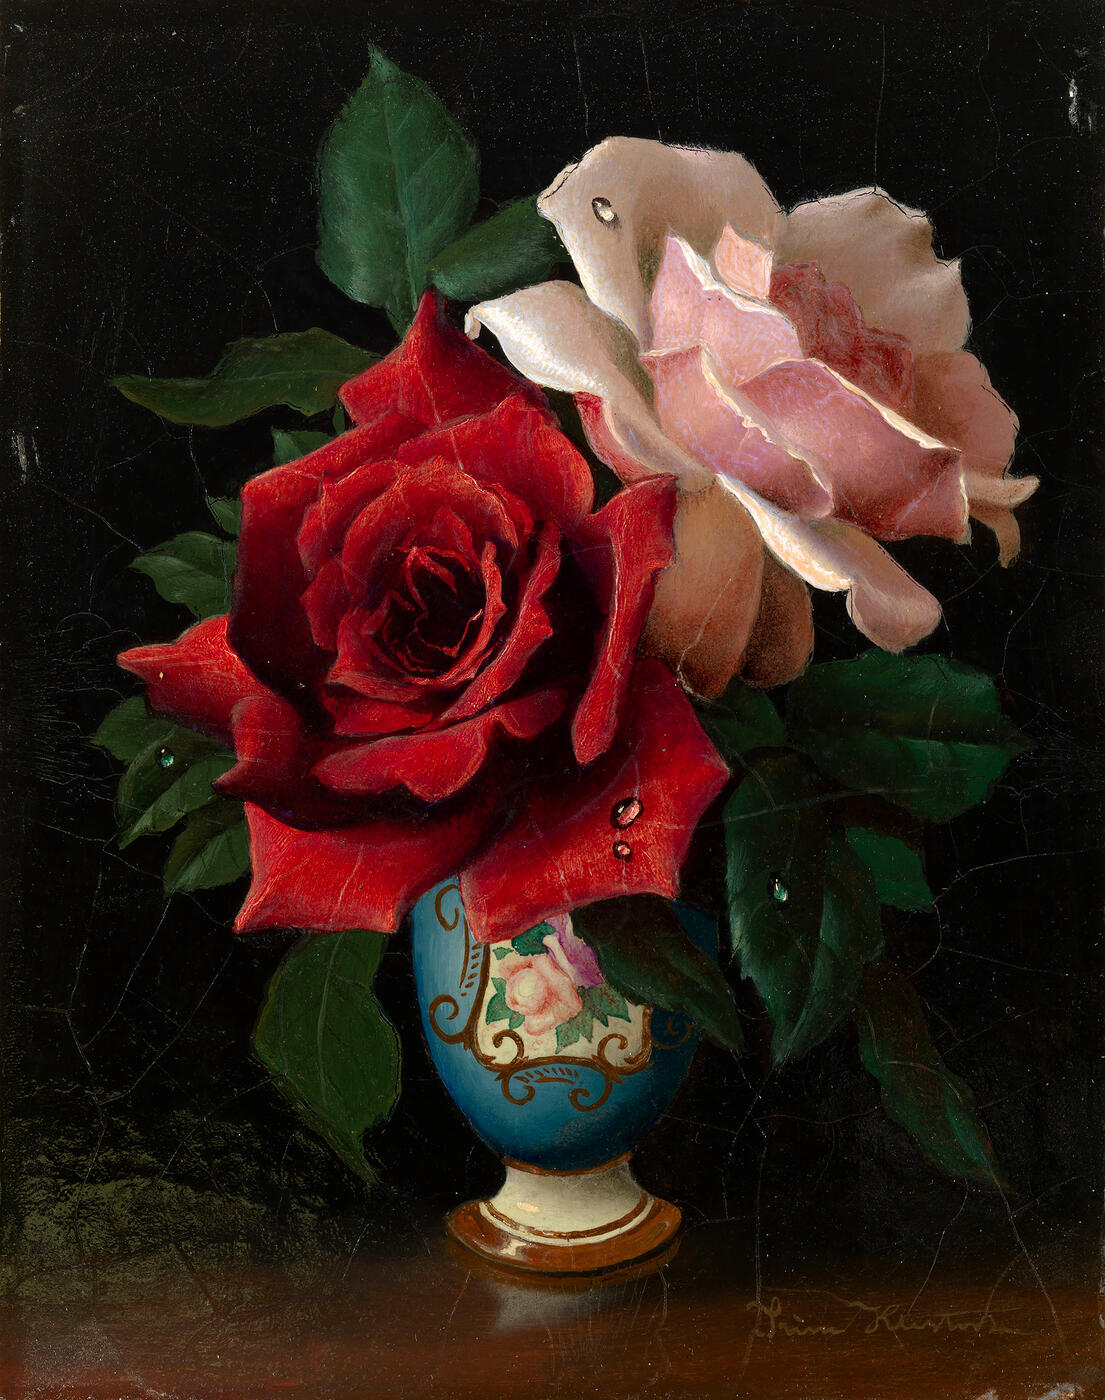 Red and Pink Roses